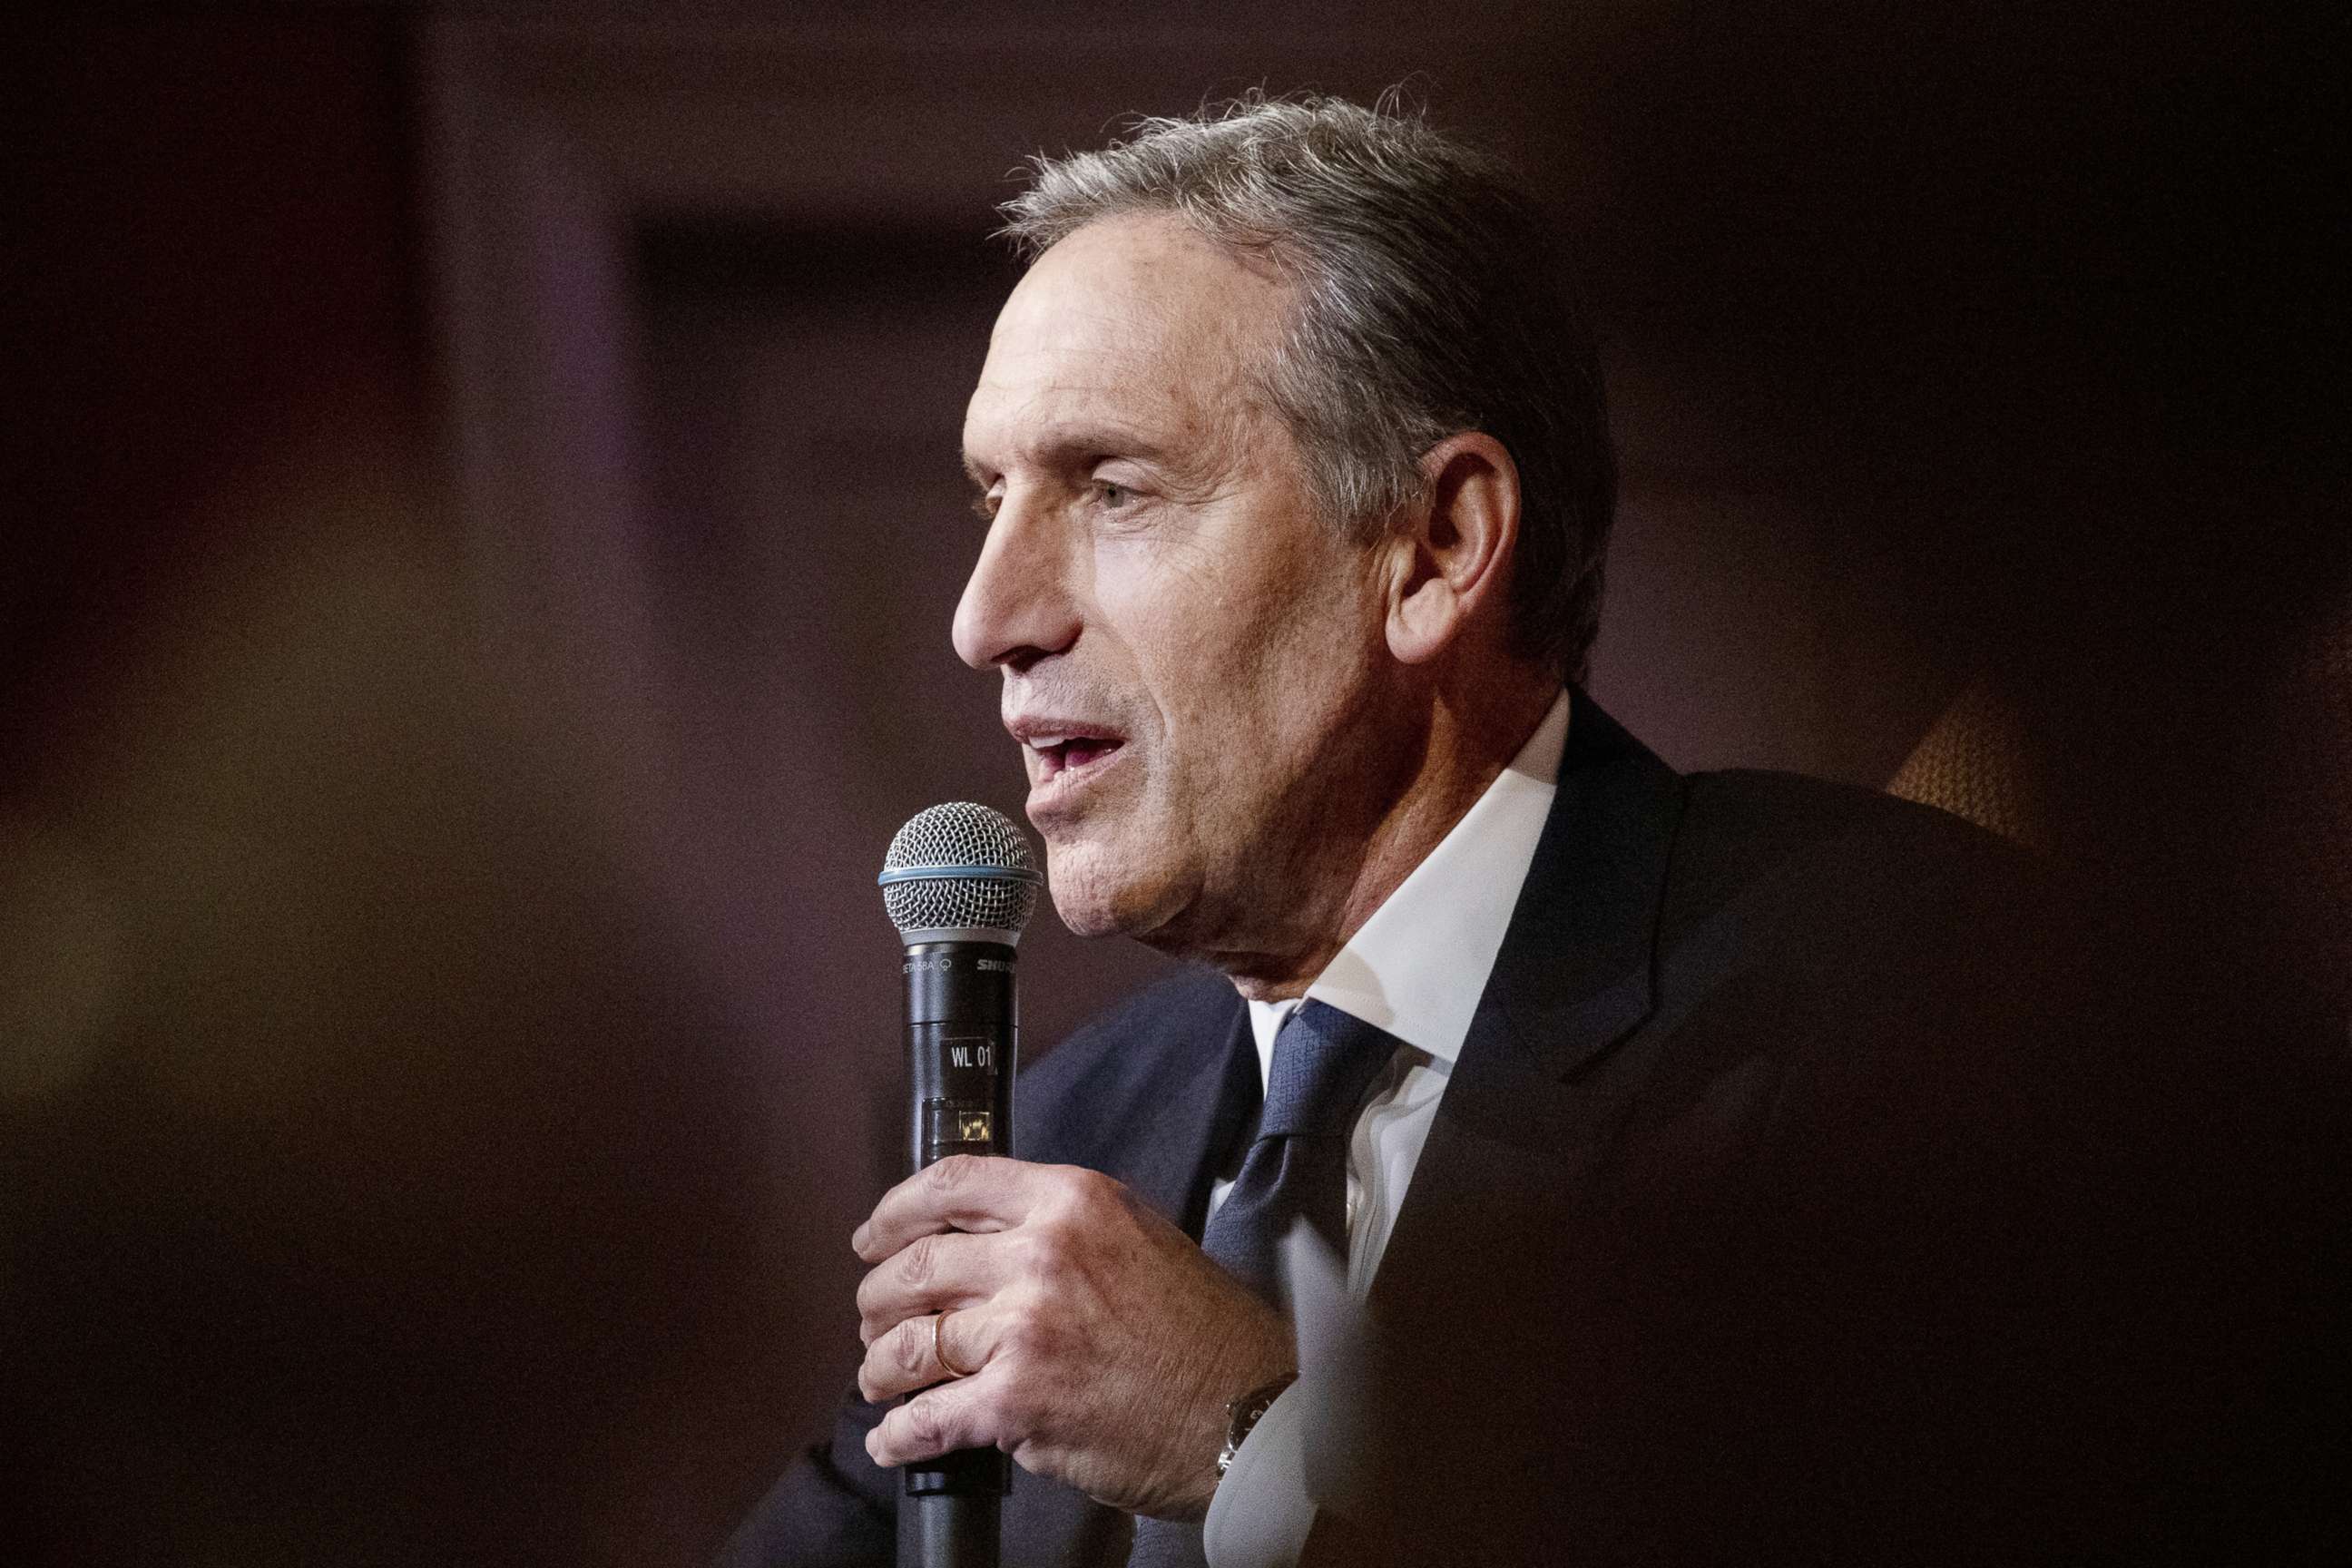 PHOTO: Howard Schultz speaks during his 'From the Ground Up' book tour in Washington, D.C., Feb. 14, 2019.